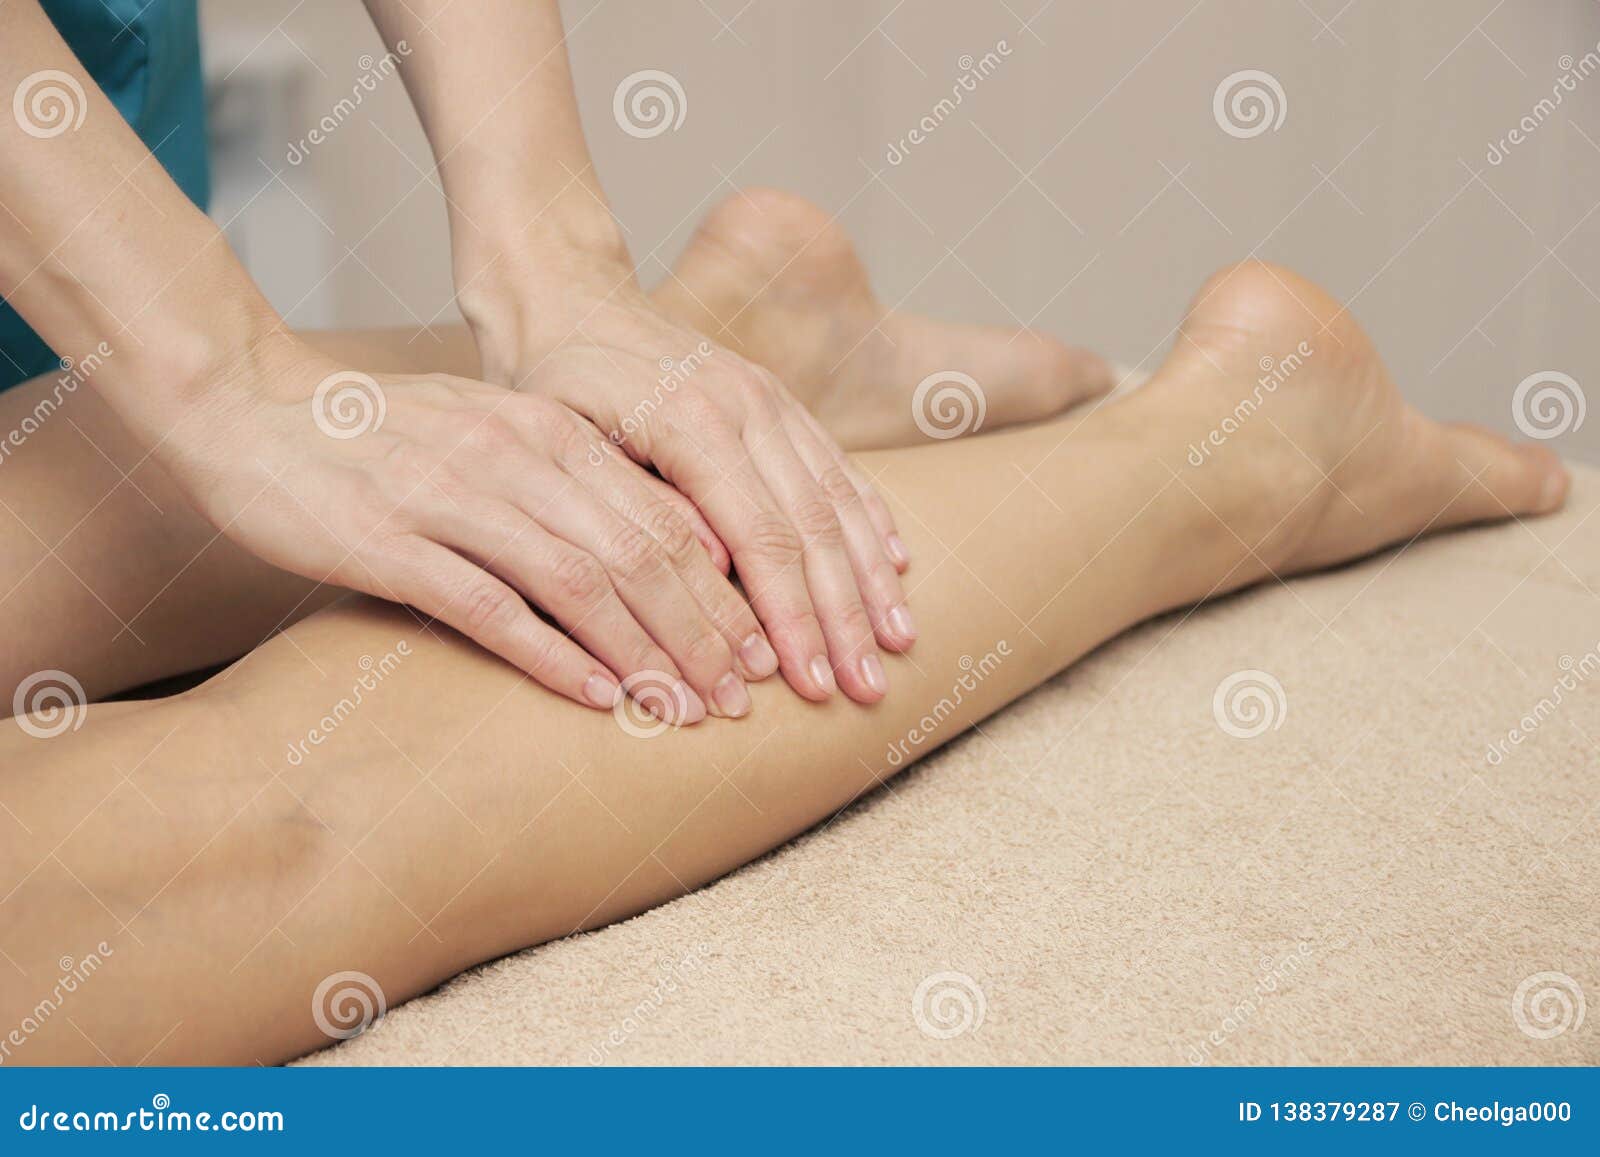 Masseur Doing Therapeutic Foot Massage For A Woman Stock Image I